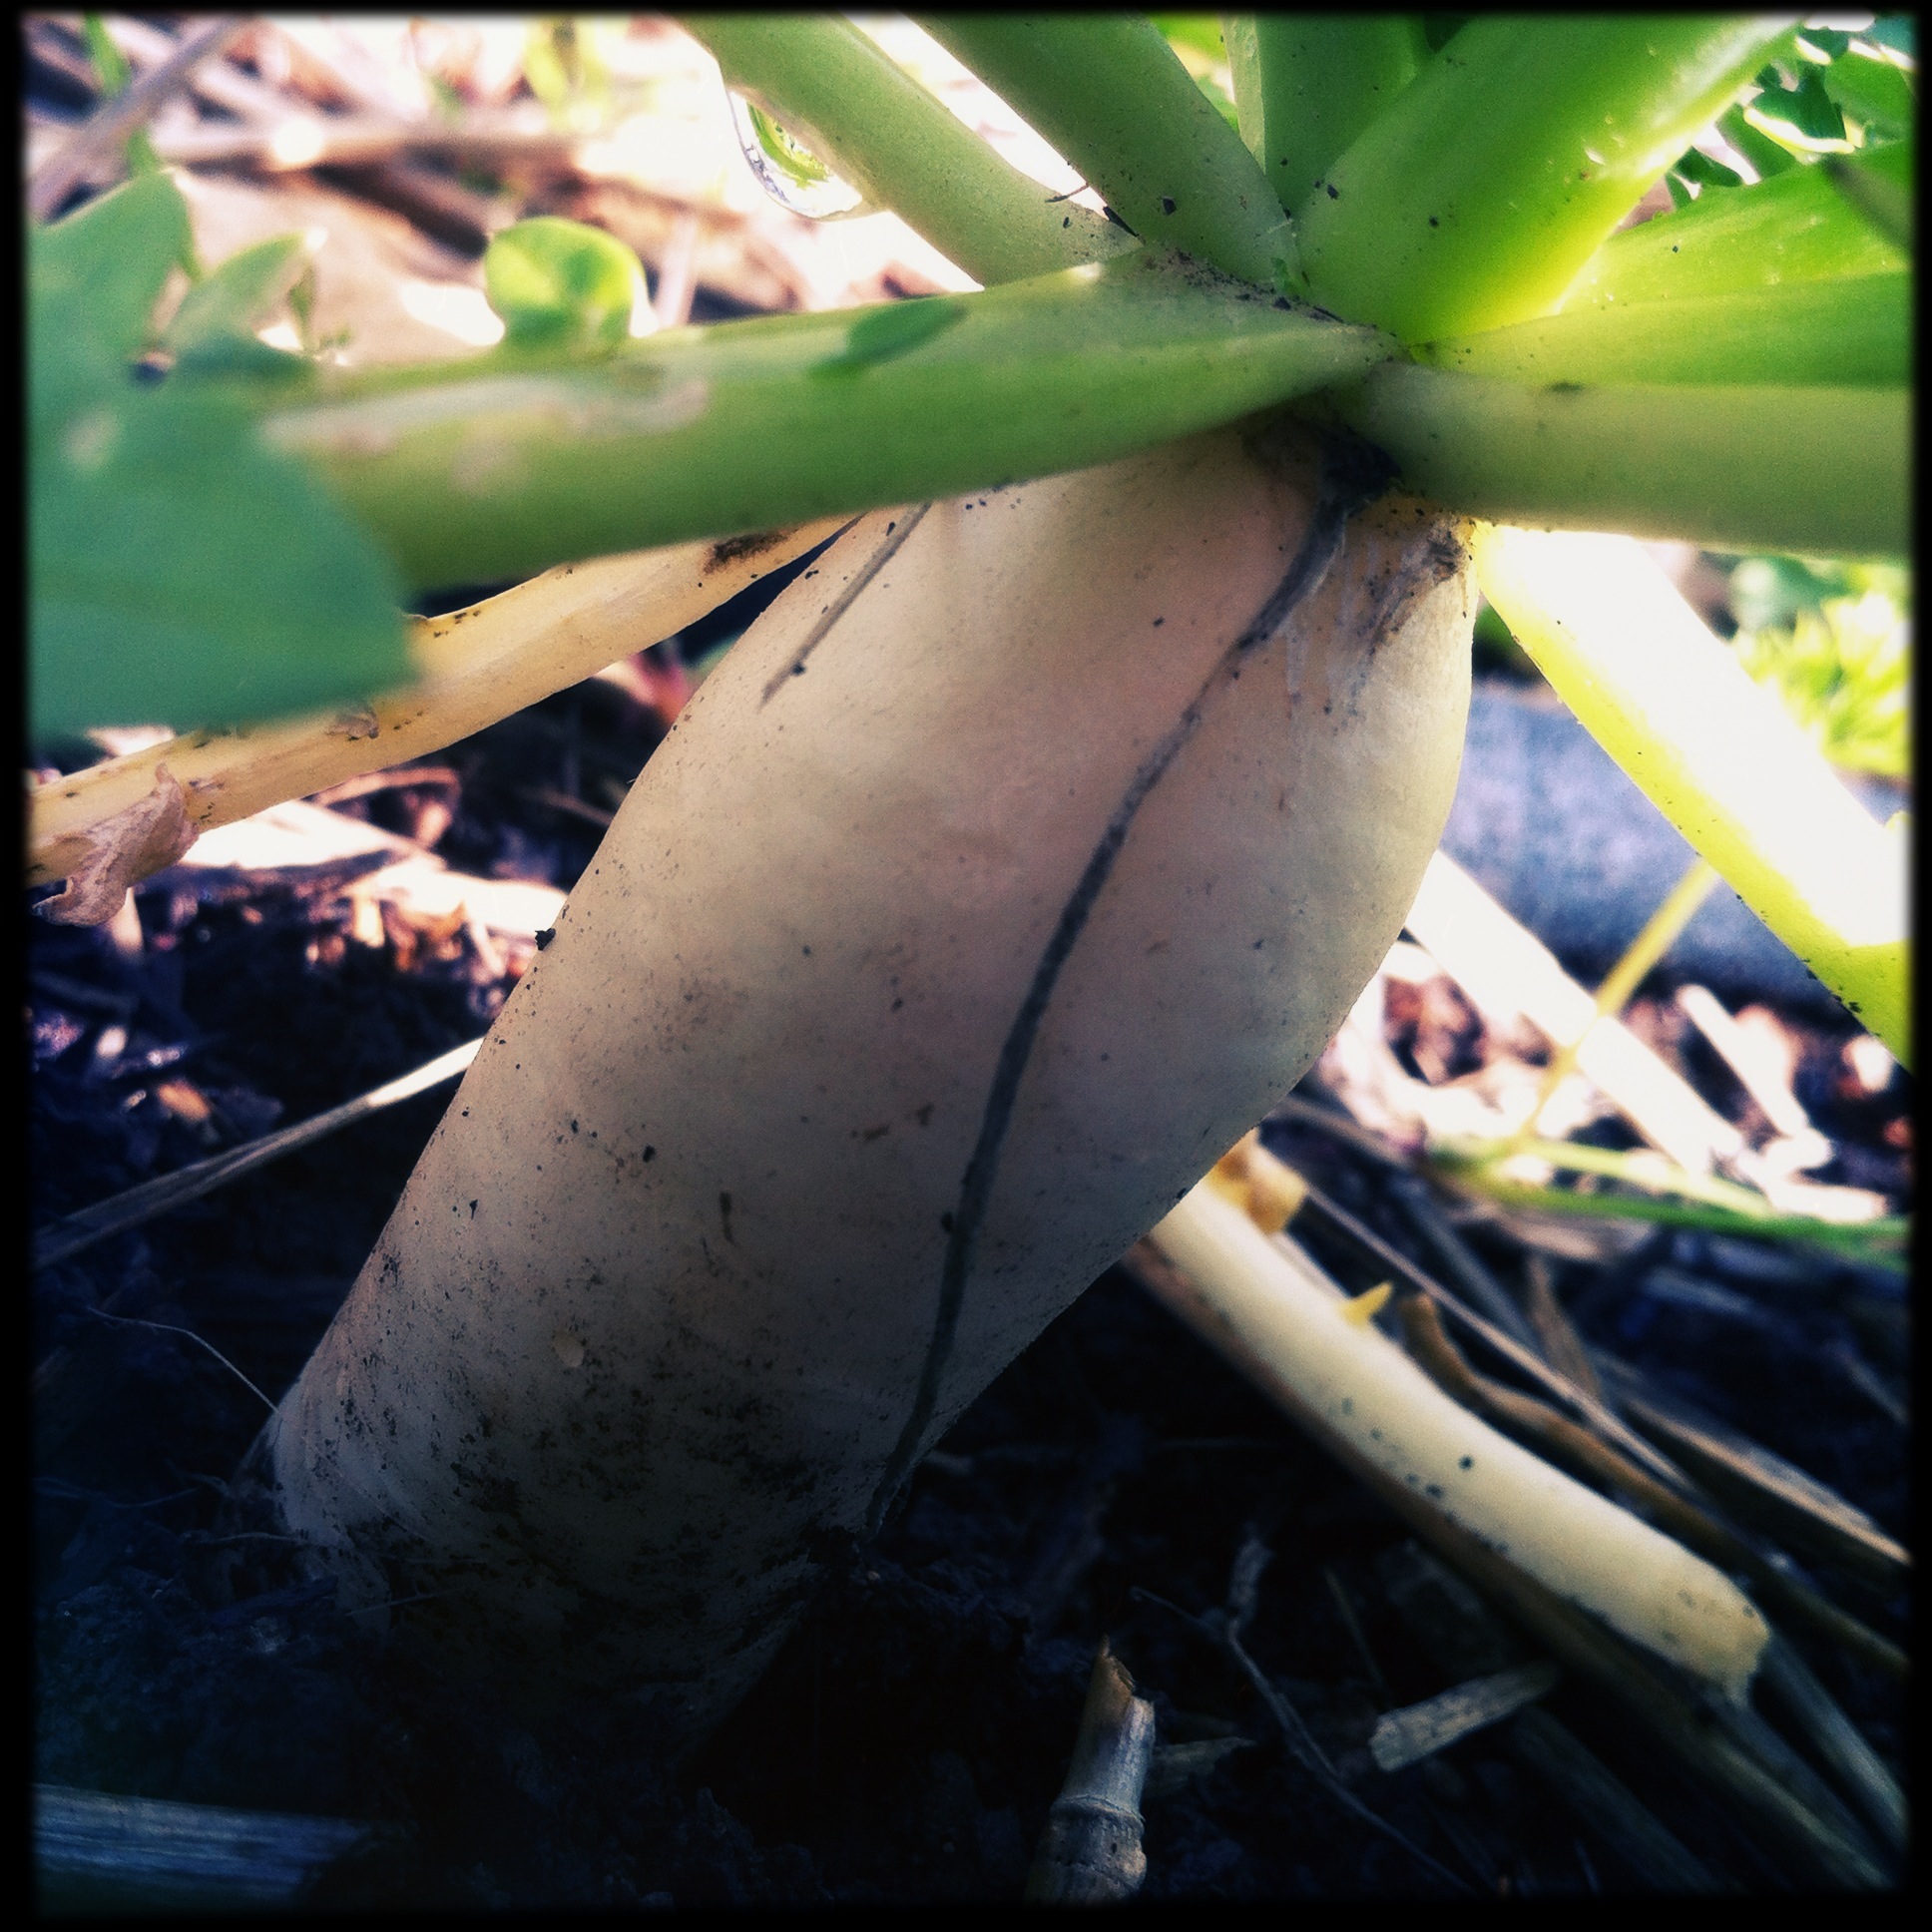 A rogue daikon radish, one of four that emerged this summer from seeds planted well over a year ago.